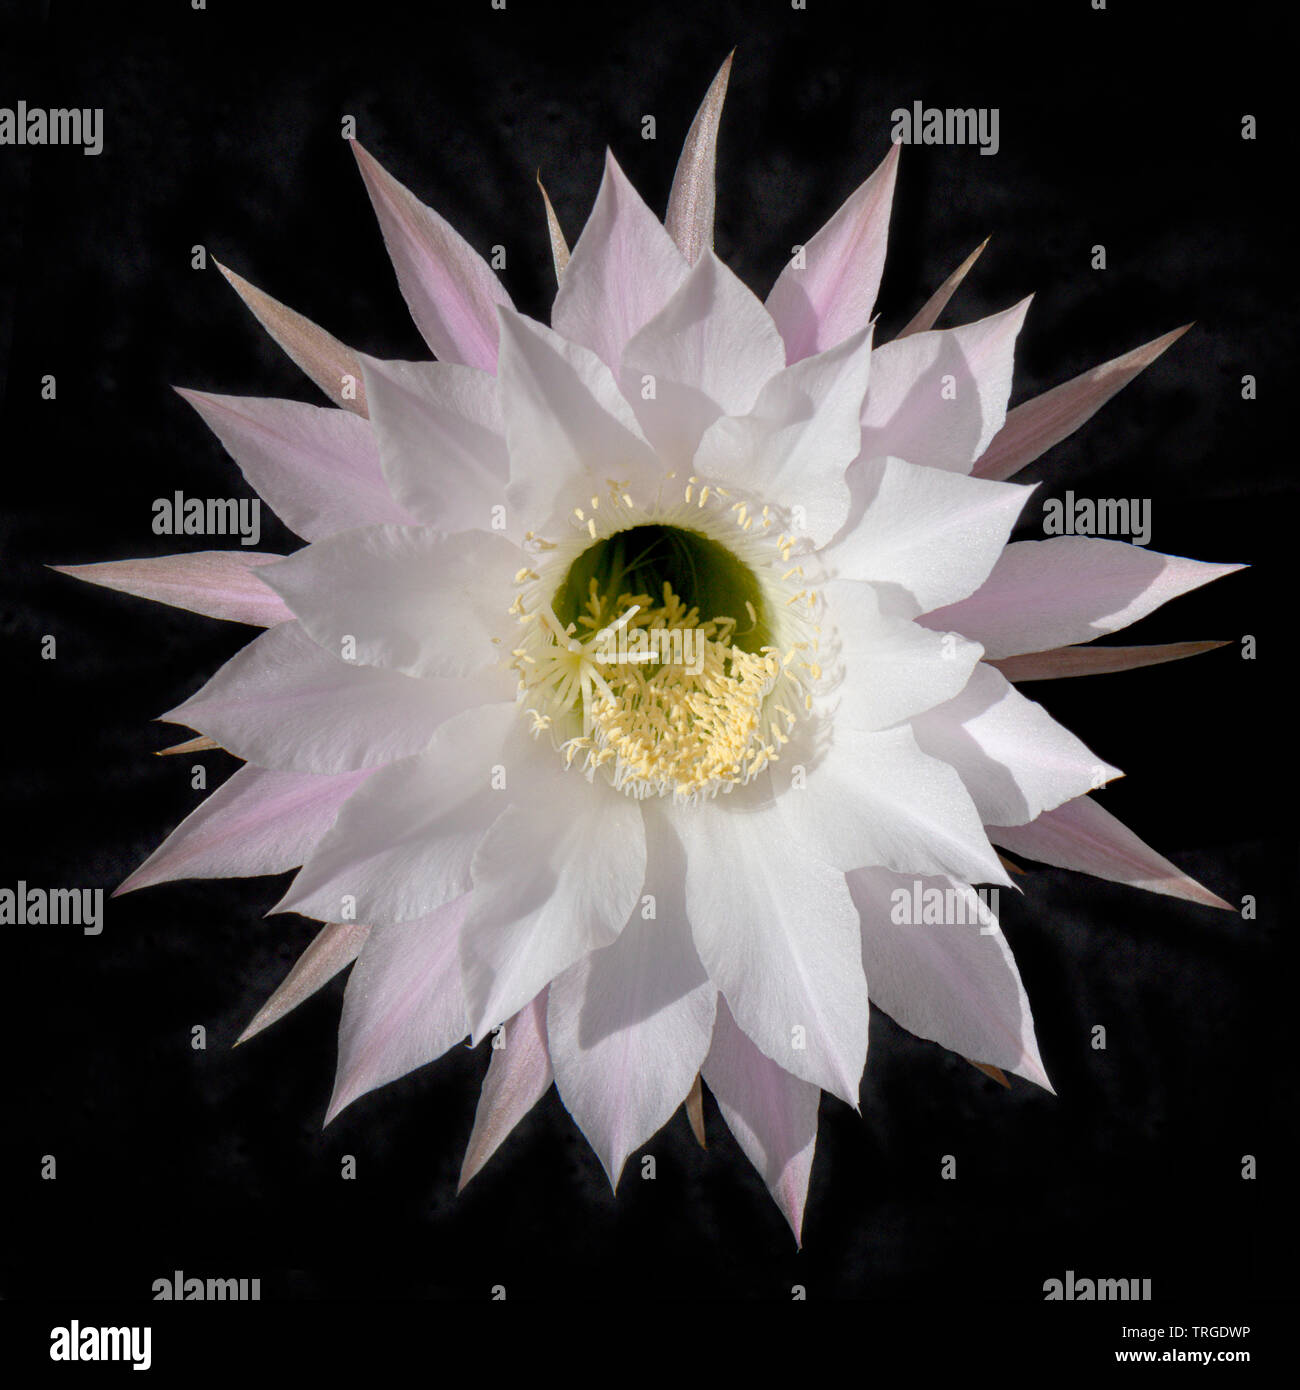 a single stunning white and pink night blooming chinopsis cactus flower centered on a black background Stock Photo